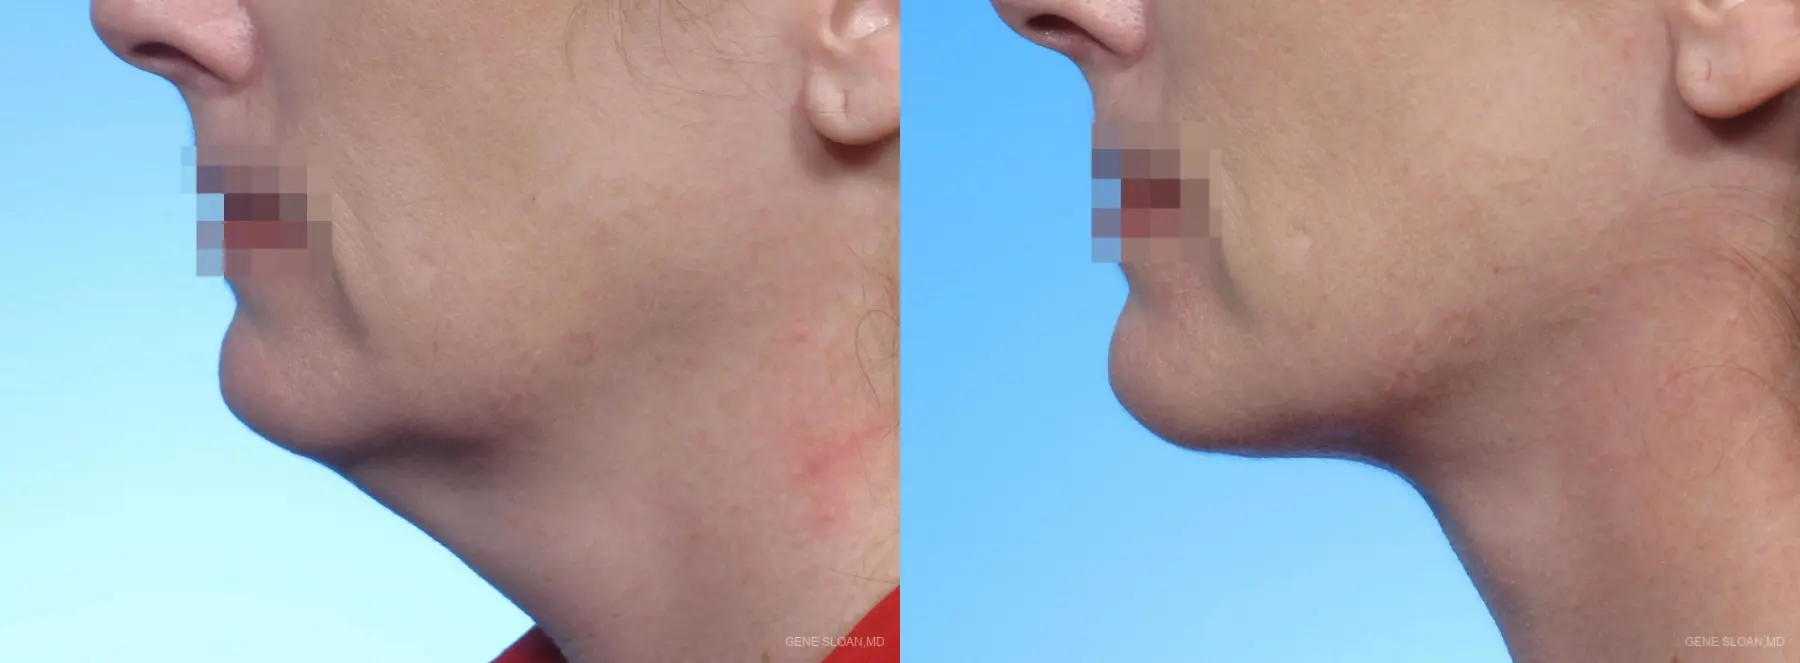 Neck Lift: Patient 2 - Before and After  